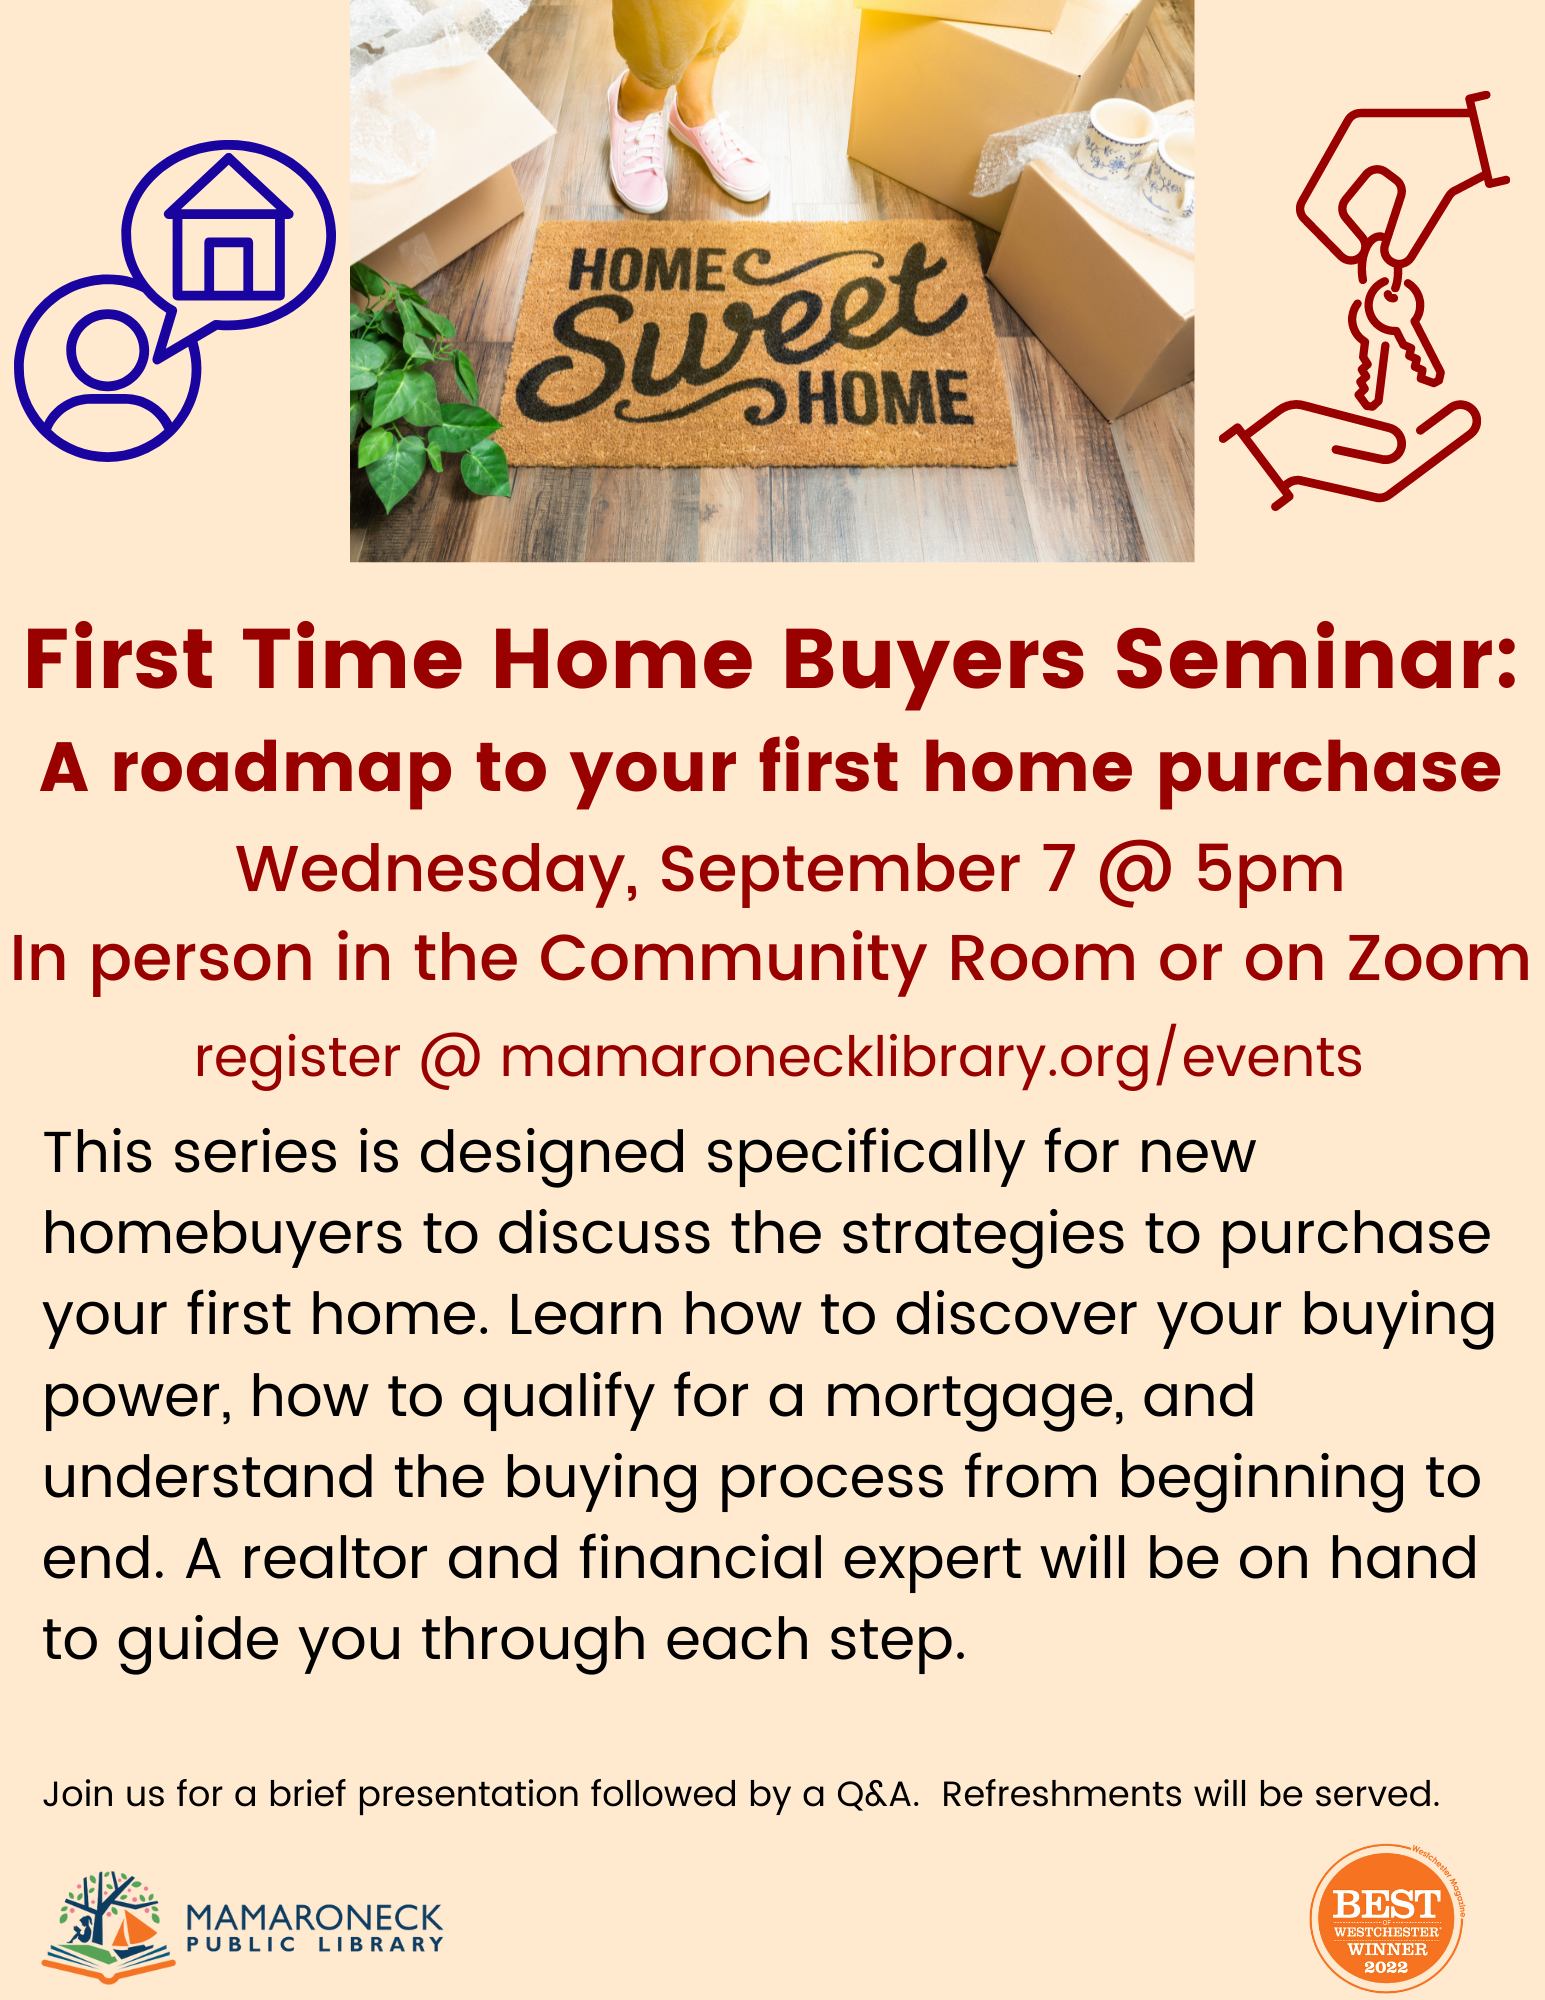 first time home buyers seminar via zoom or in person Sept. 7 7